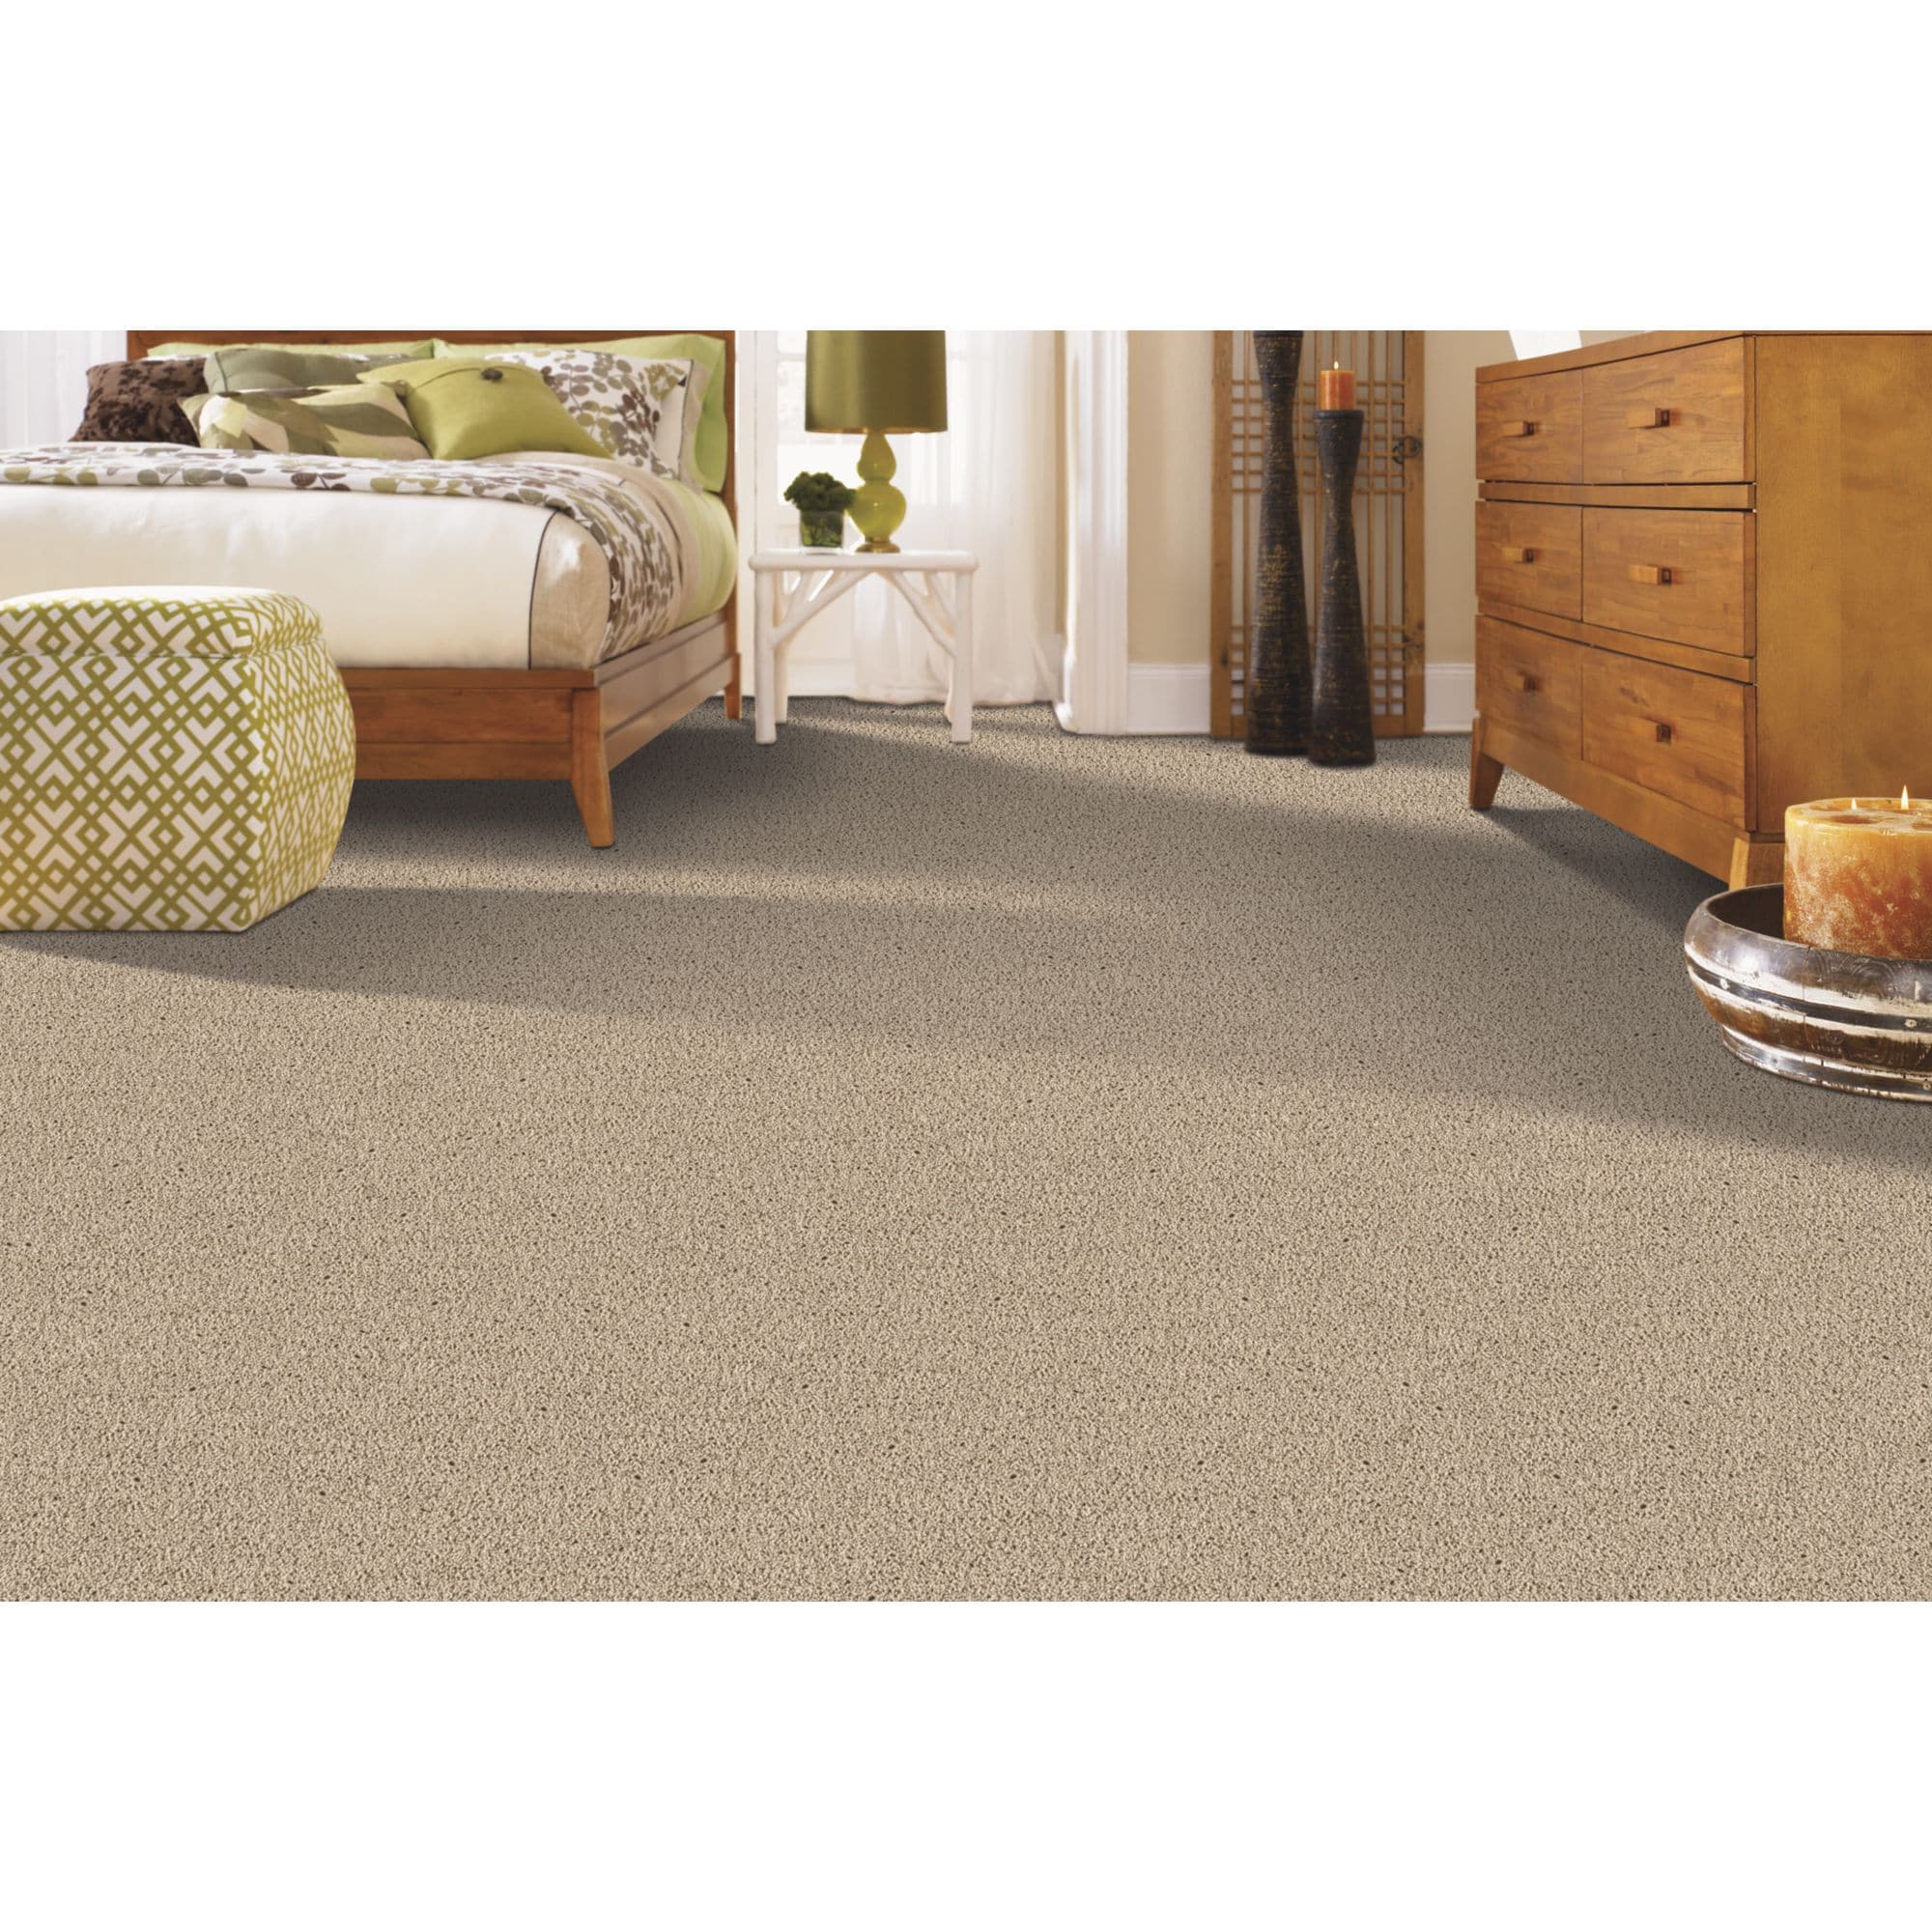 Style Selections Gratitude Textured in Carpet Cobble department the Indoor Carpet at Path